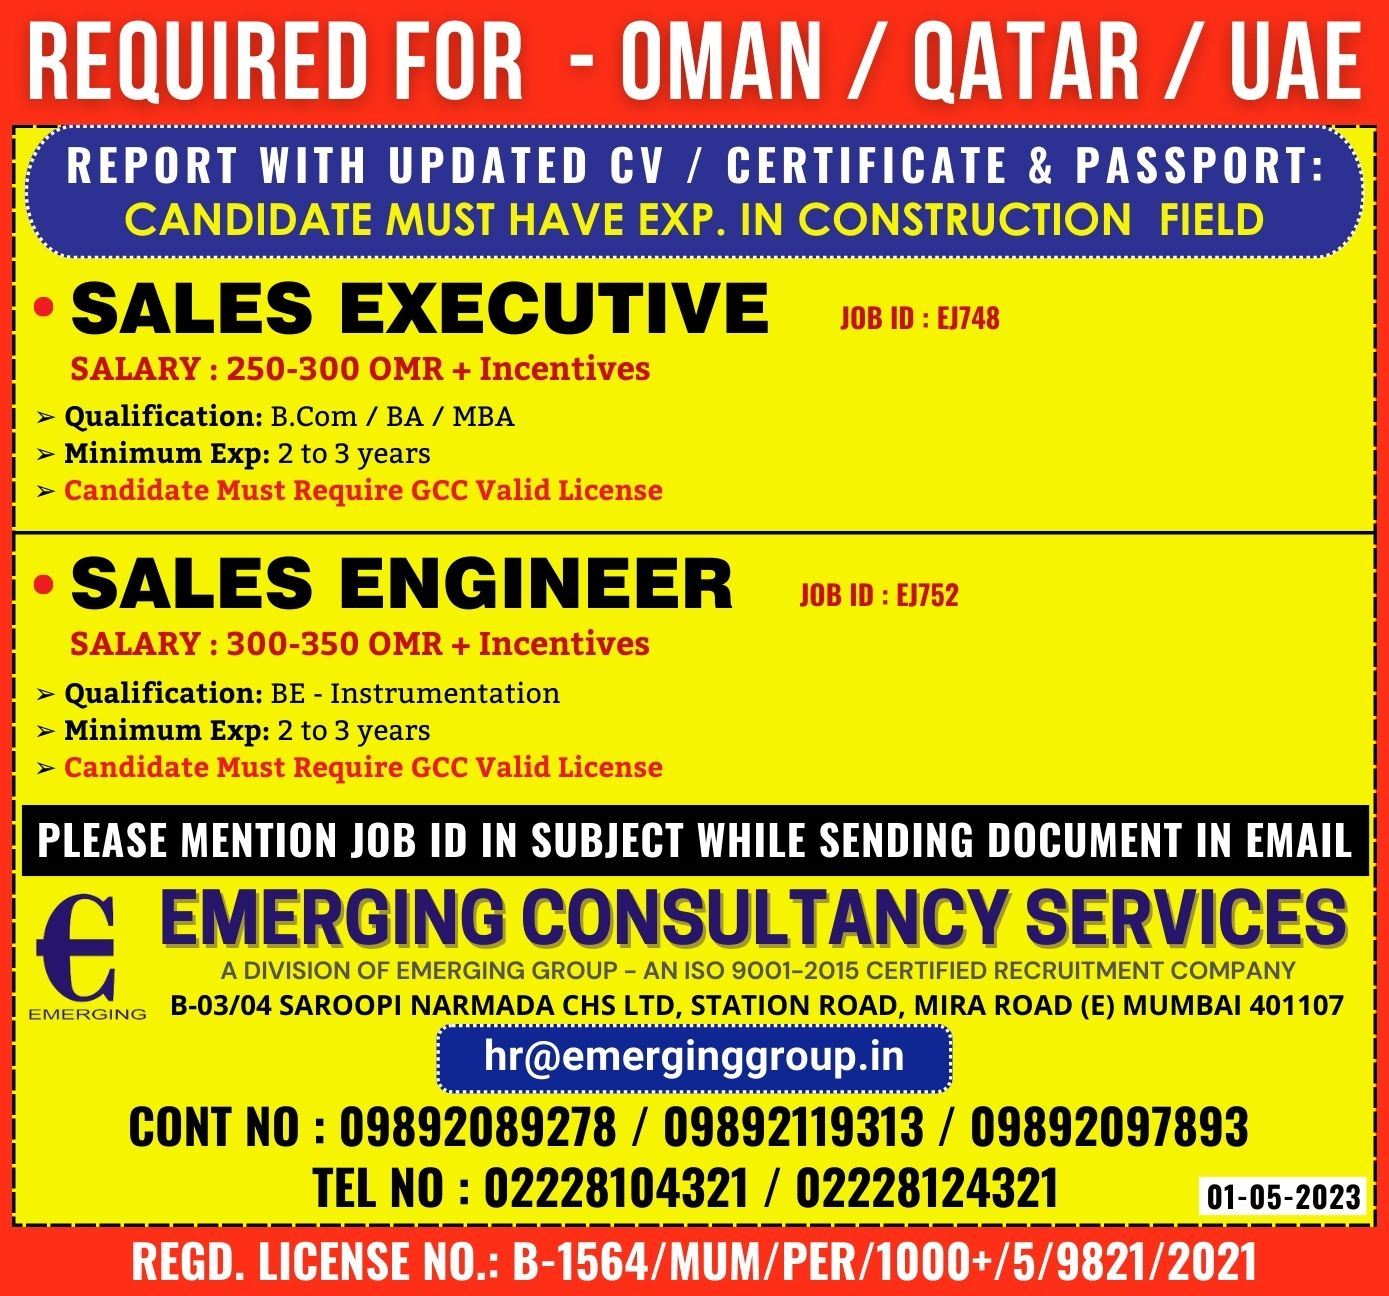 EMERGING CONSULTANCY SERVICES-8f591244